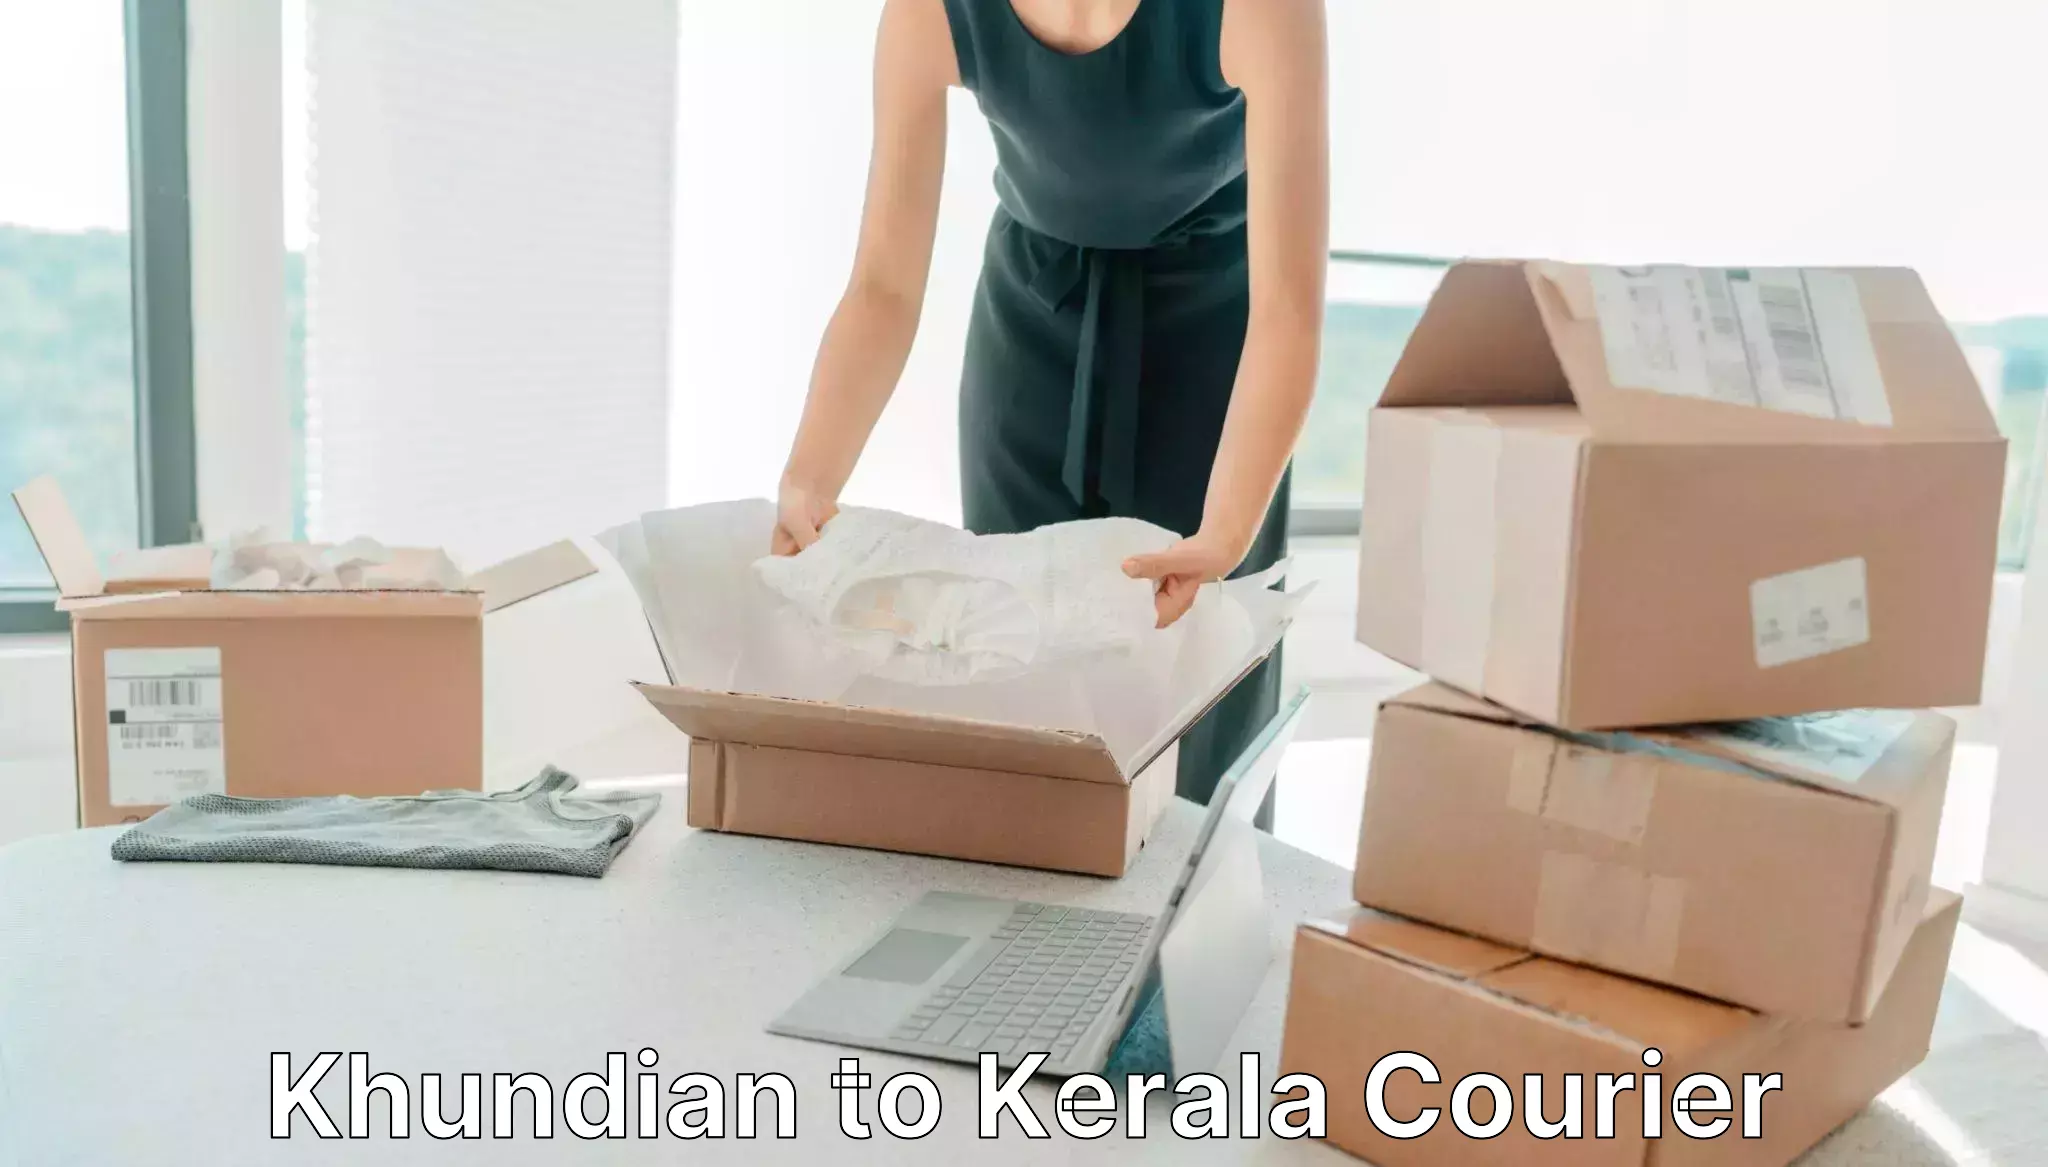 Parcel service for businesses Khundian to Kerala